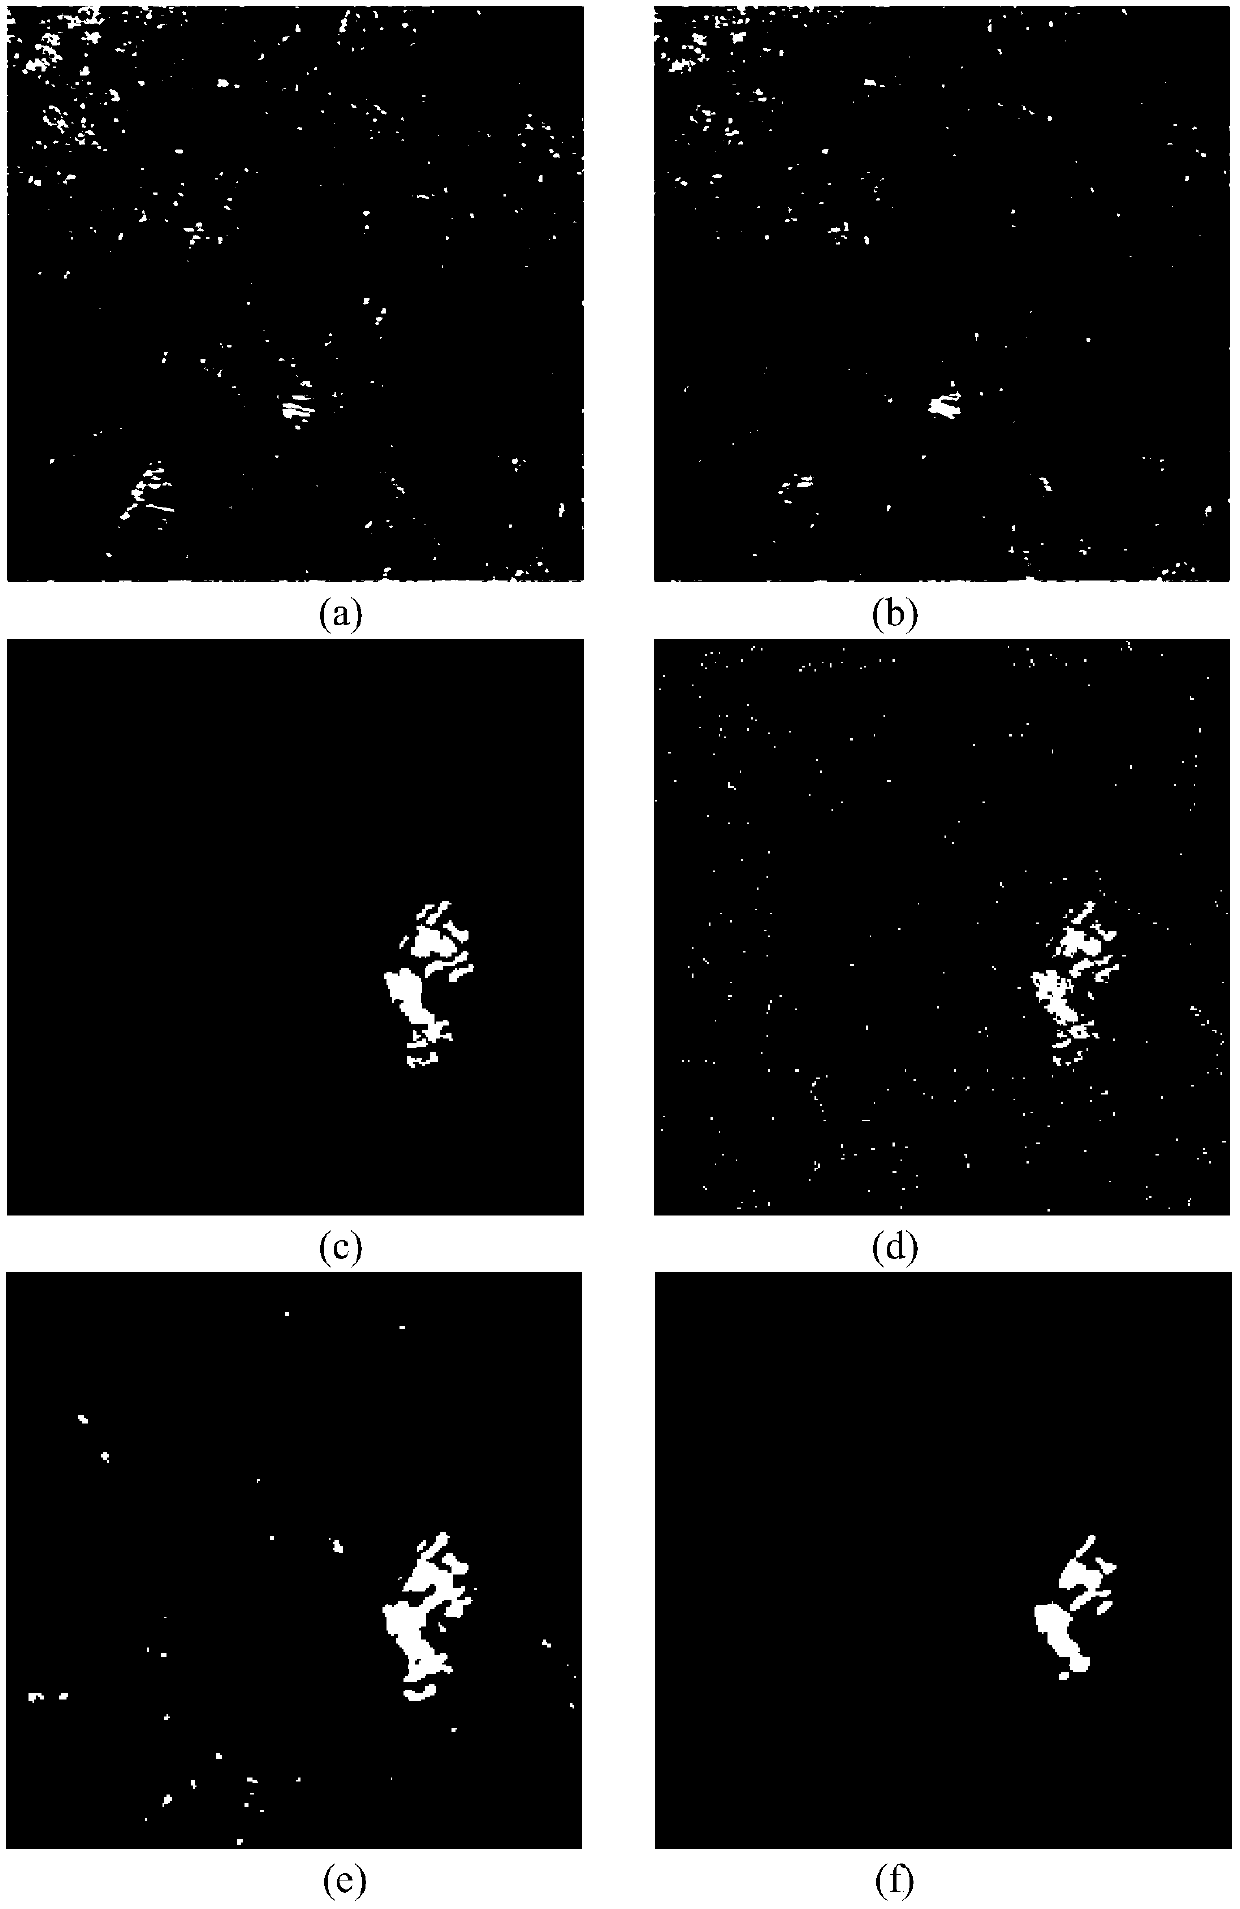 SAR image change detection method based on deep learning and SIFT features